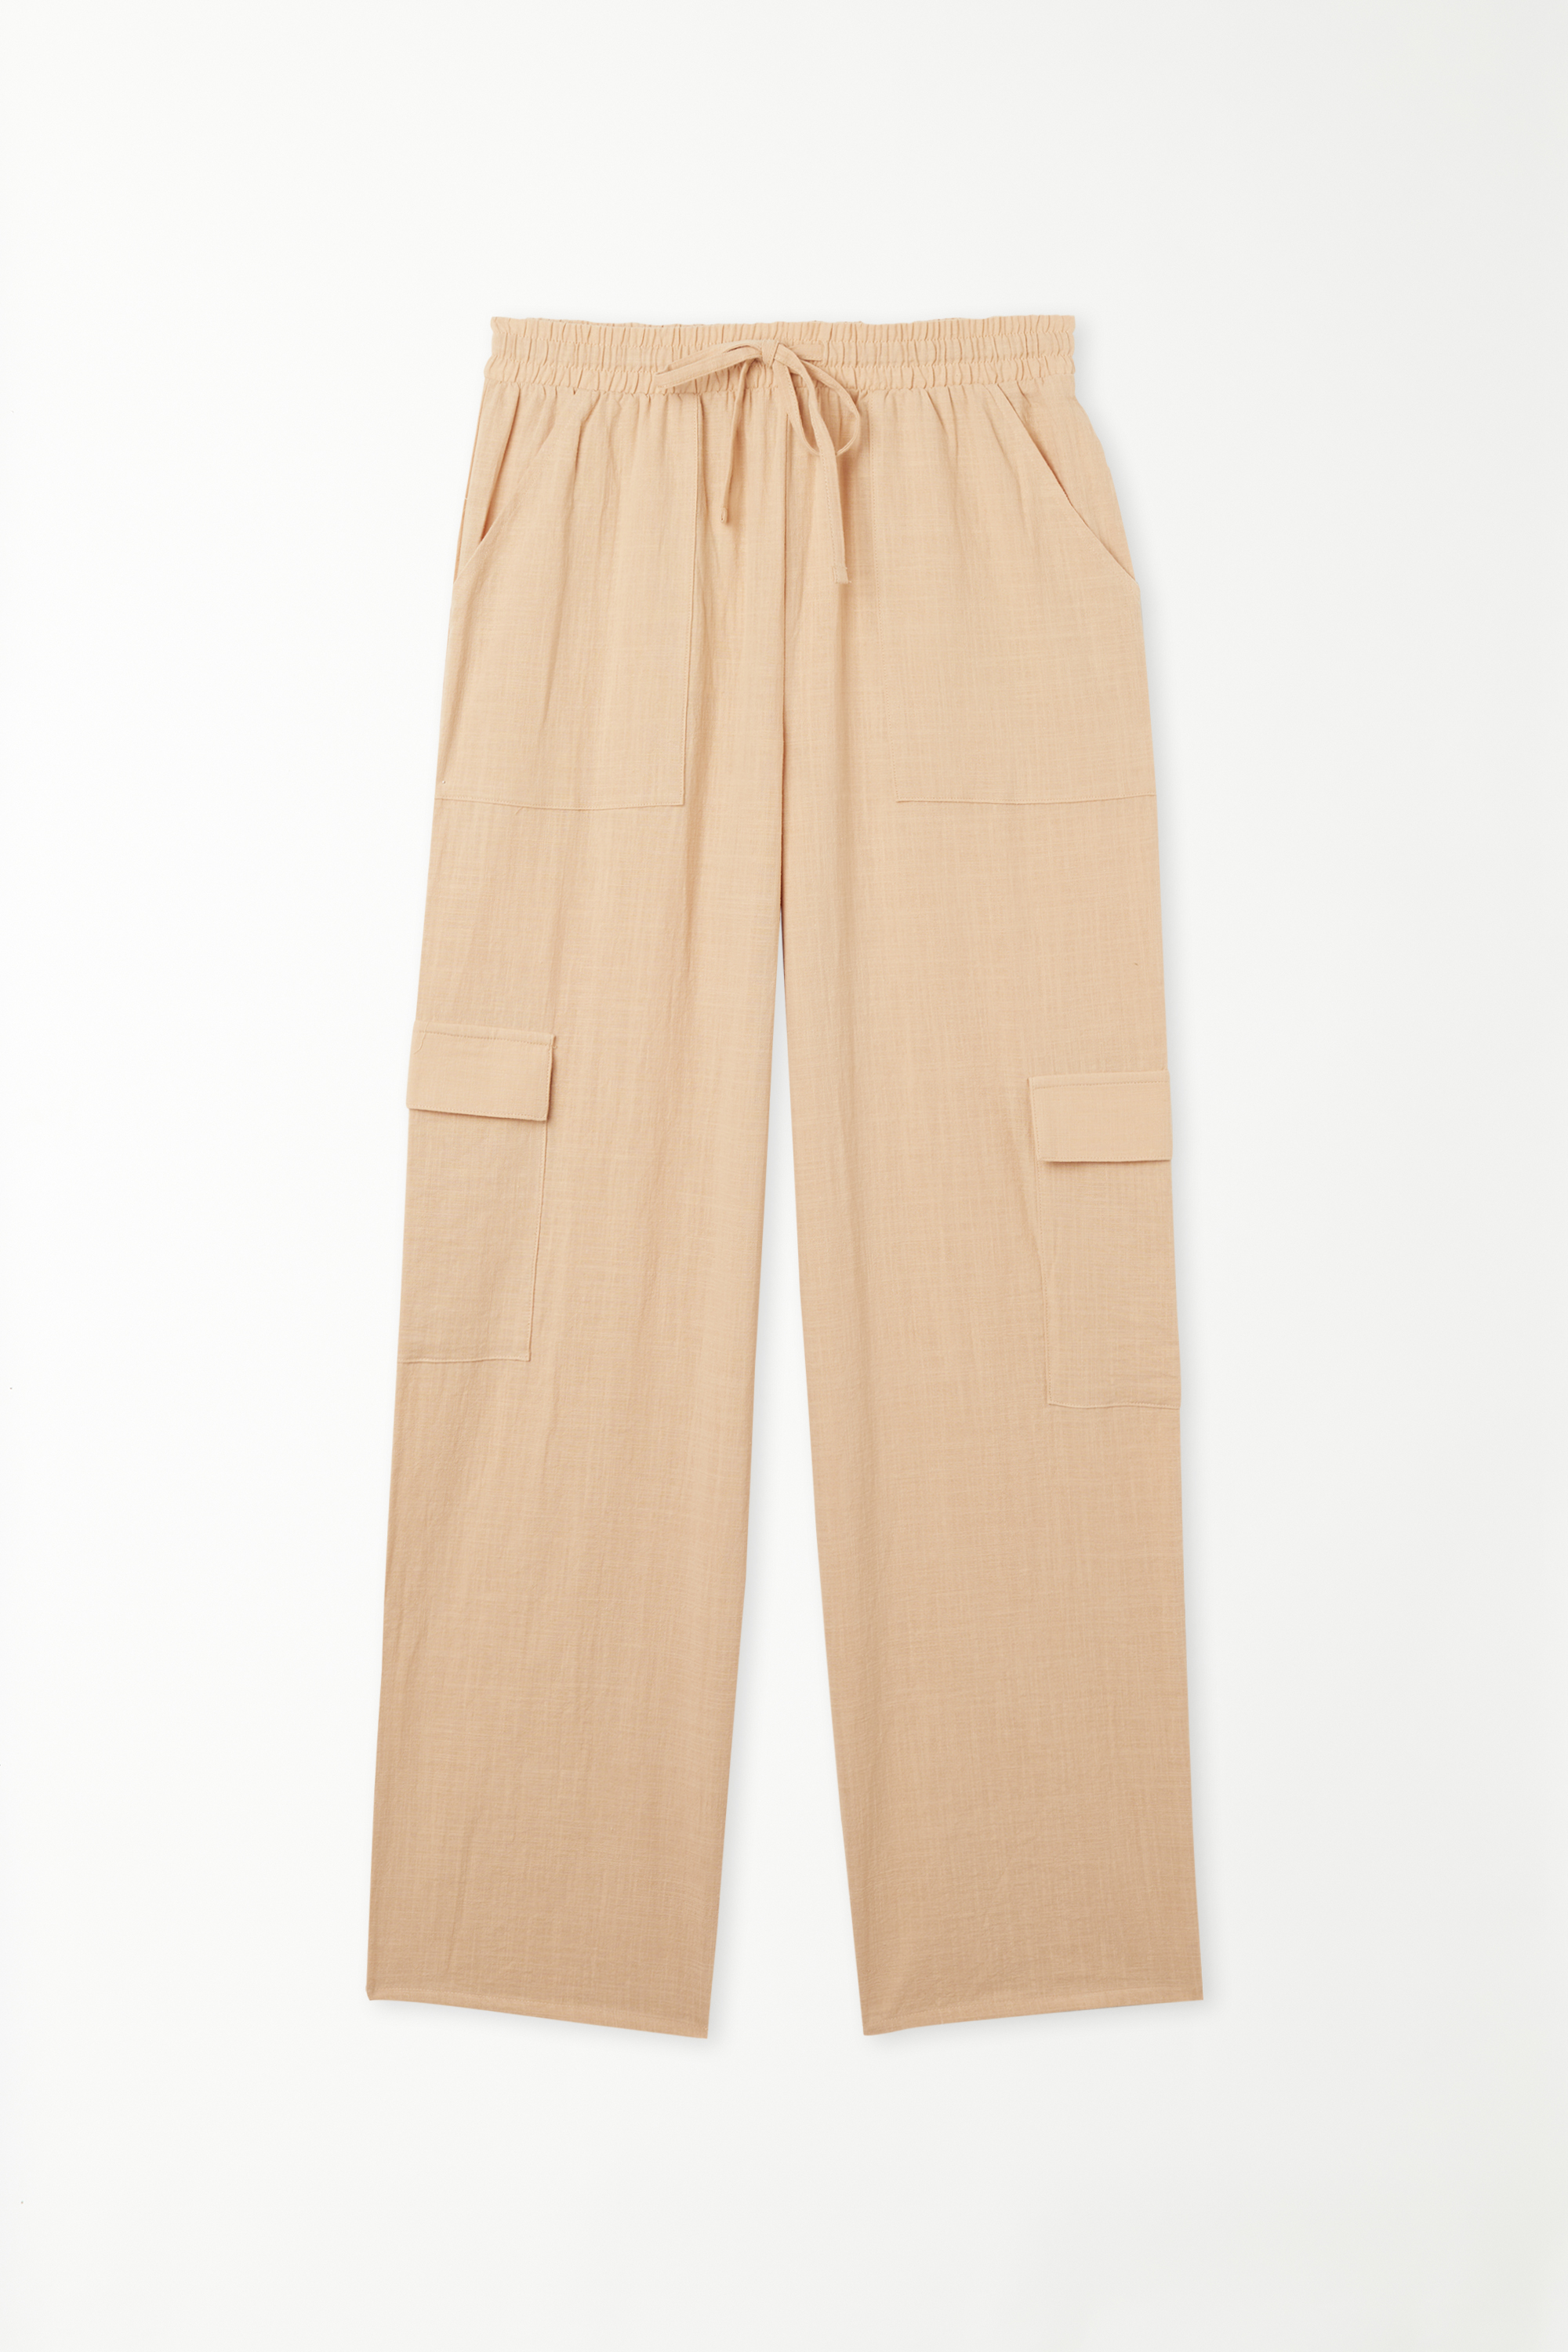 Cotton Canvas Trousers with Pockets